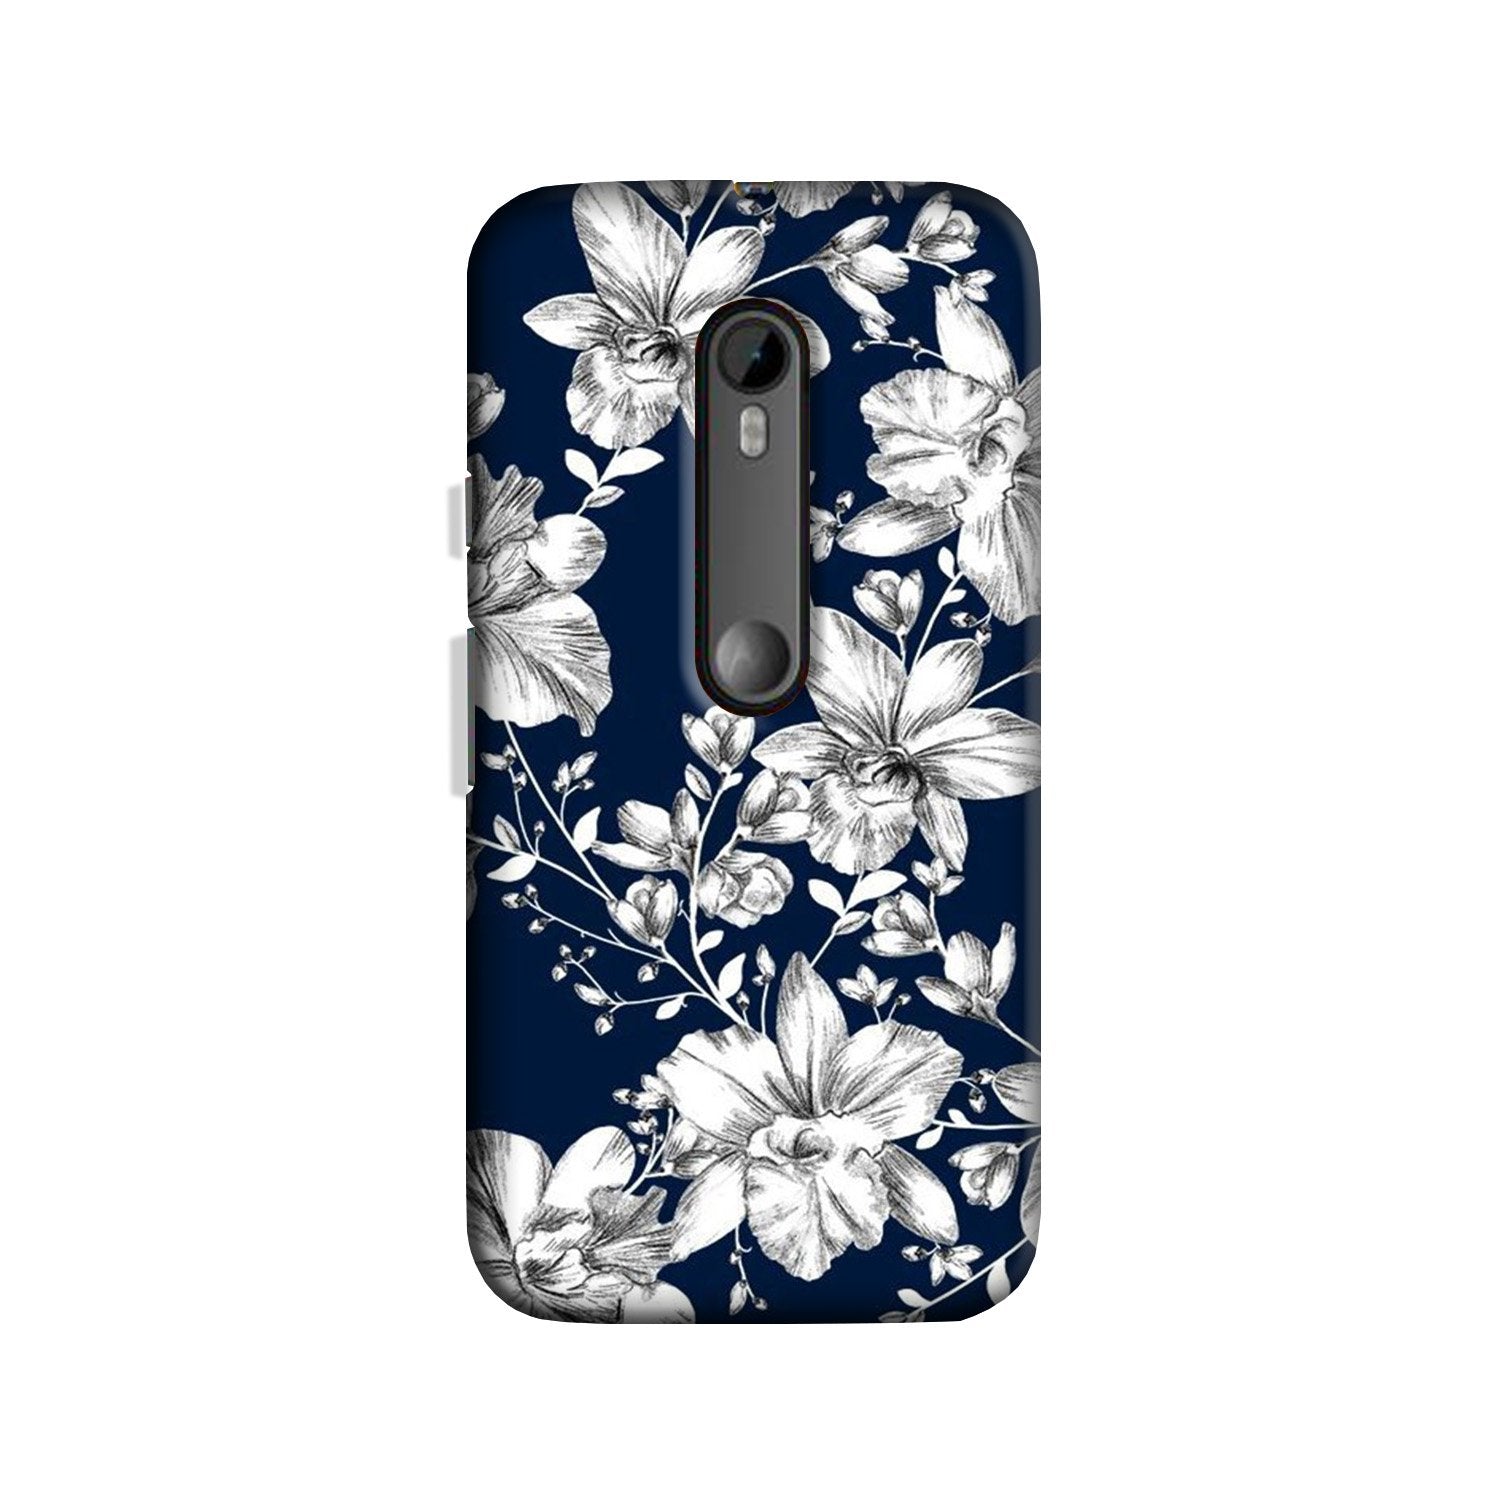 White flowers Blue Background Case for Moto X Play